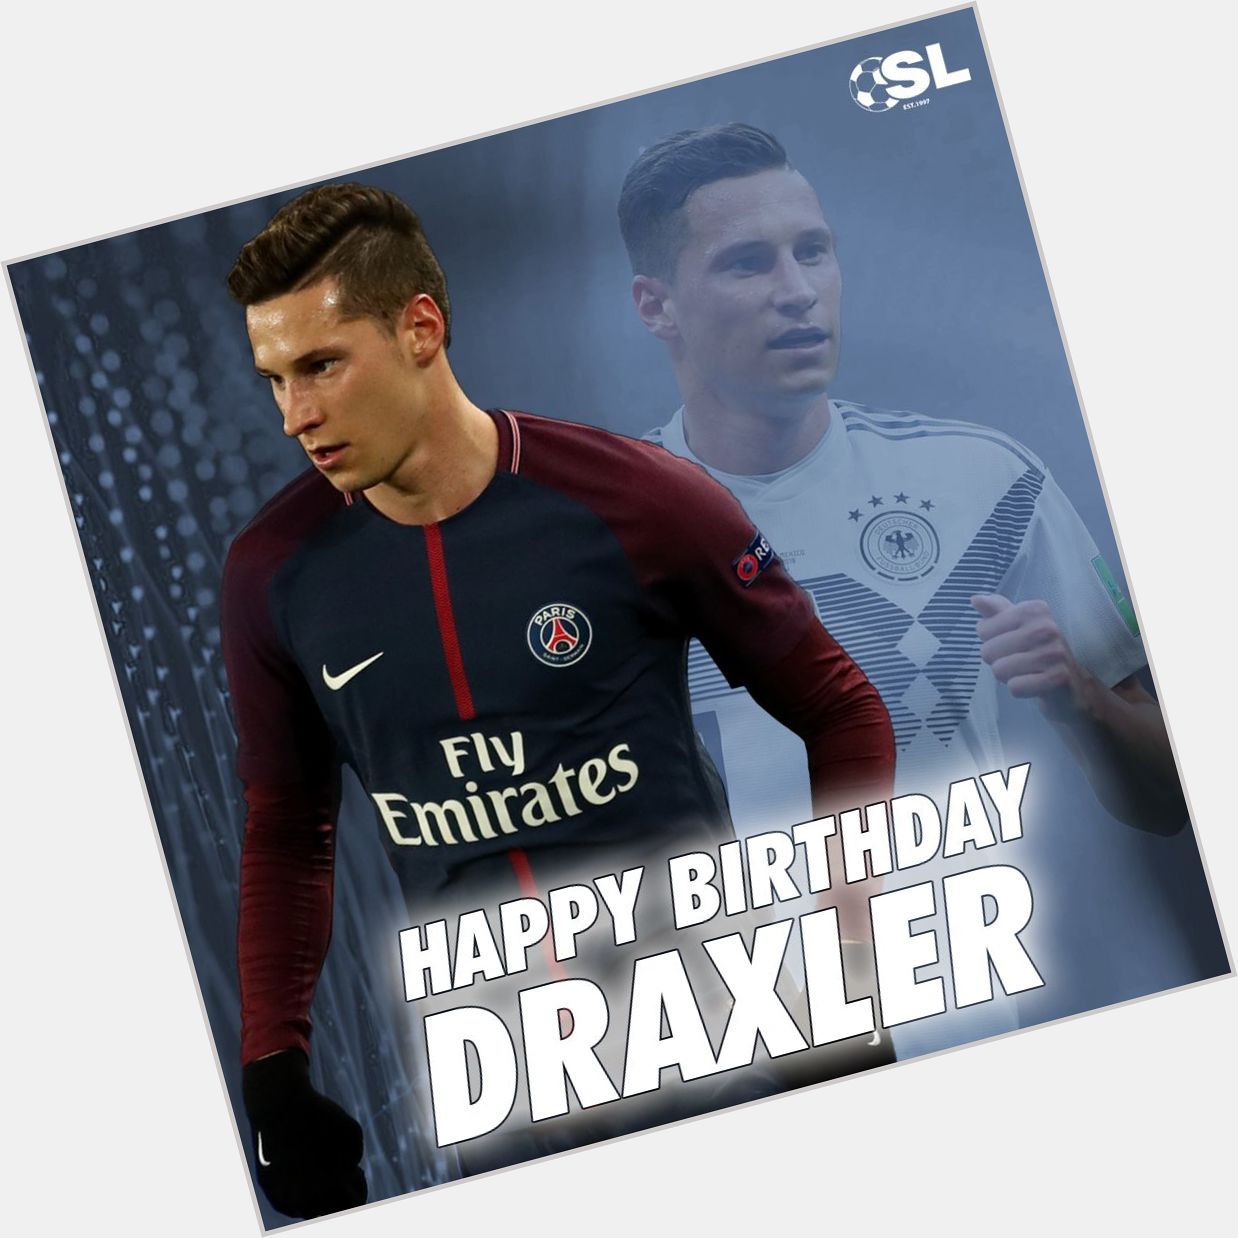 Julian Draxler is celebrating his 25th birthday today! Join us in wishing him a Happy Birthday! 